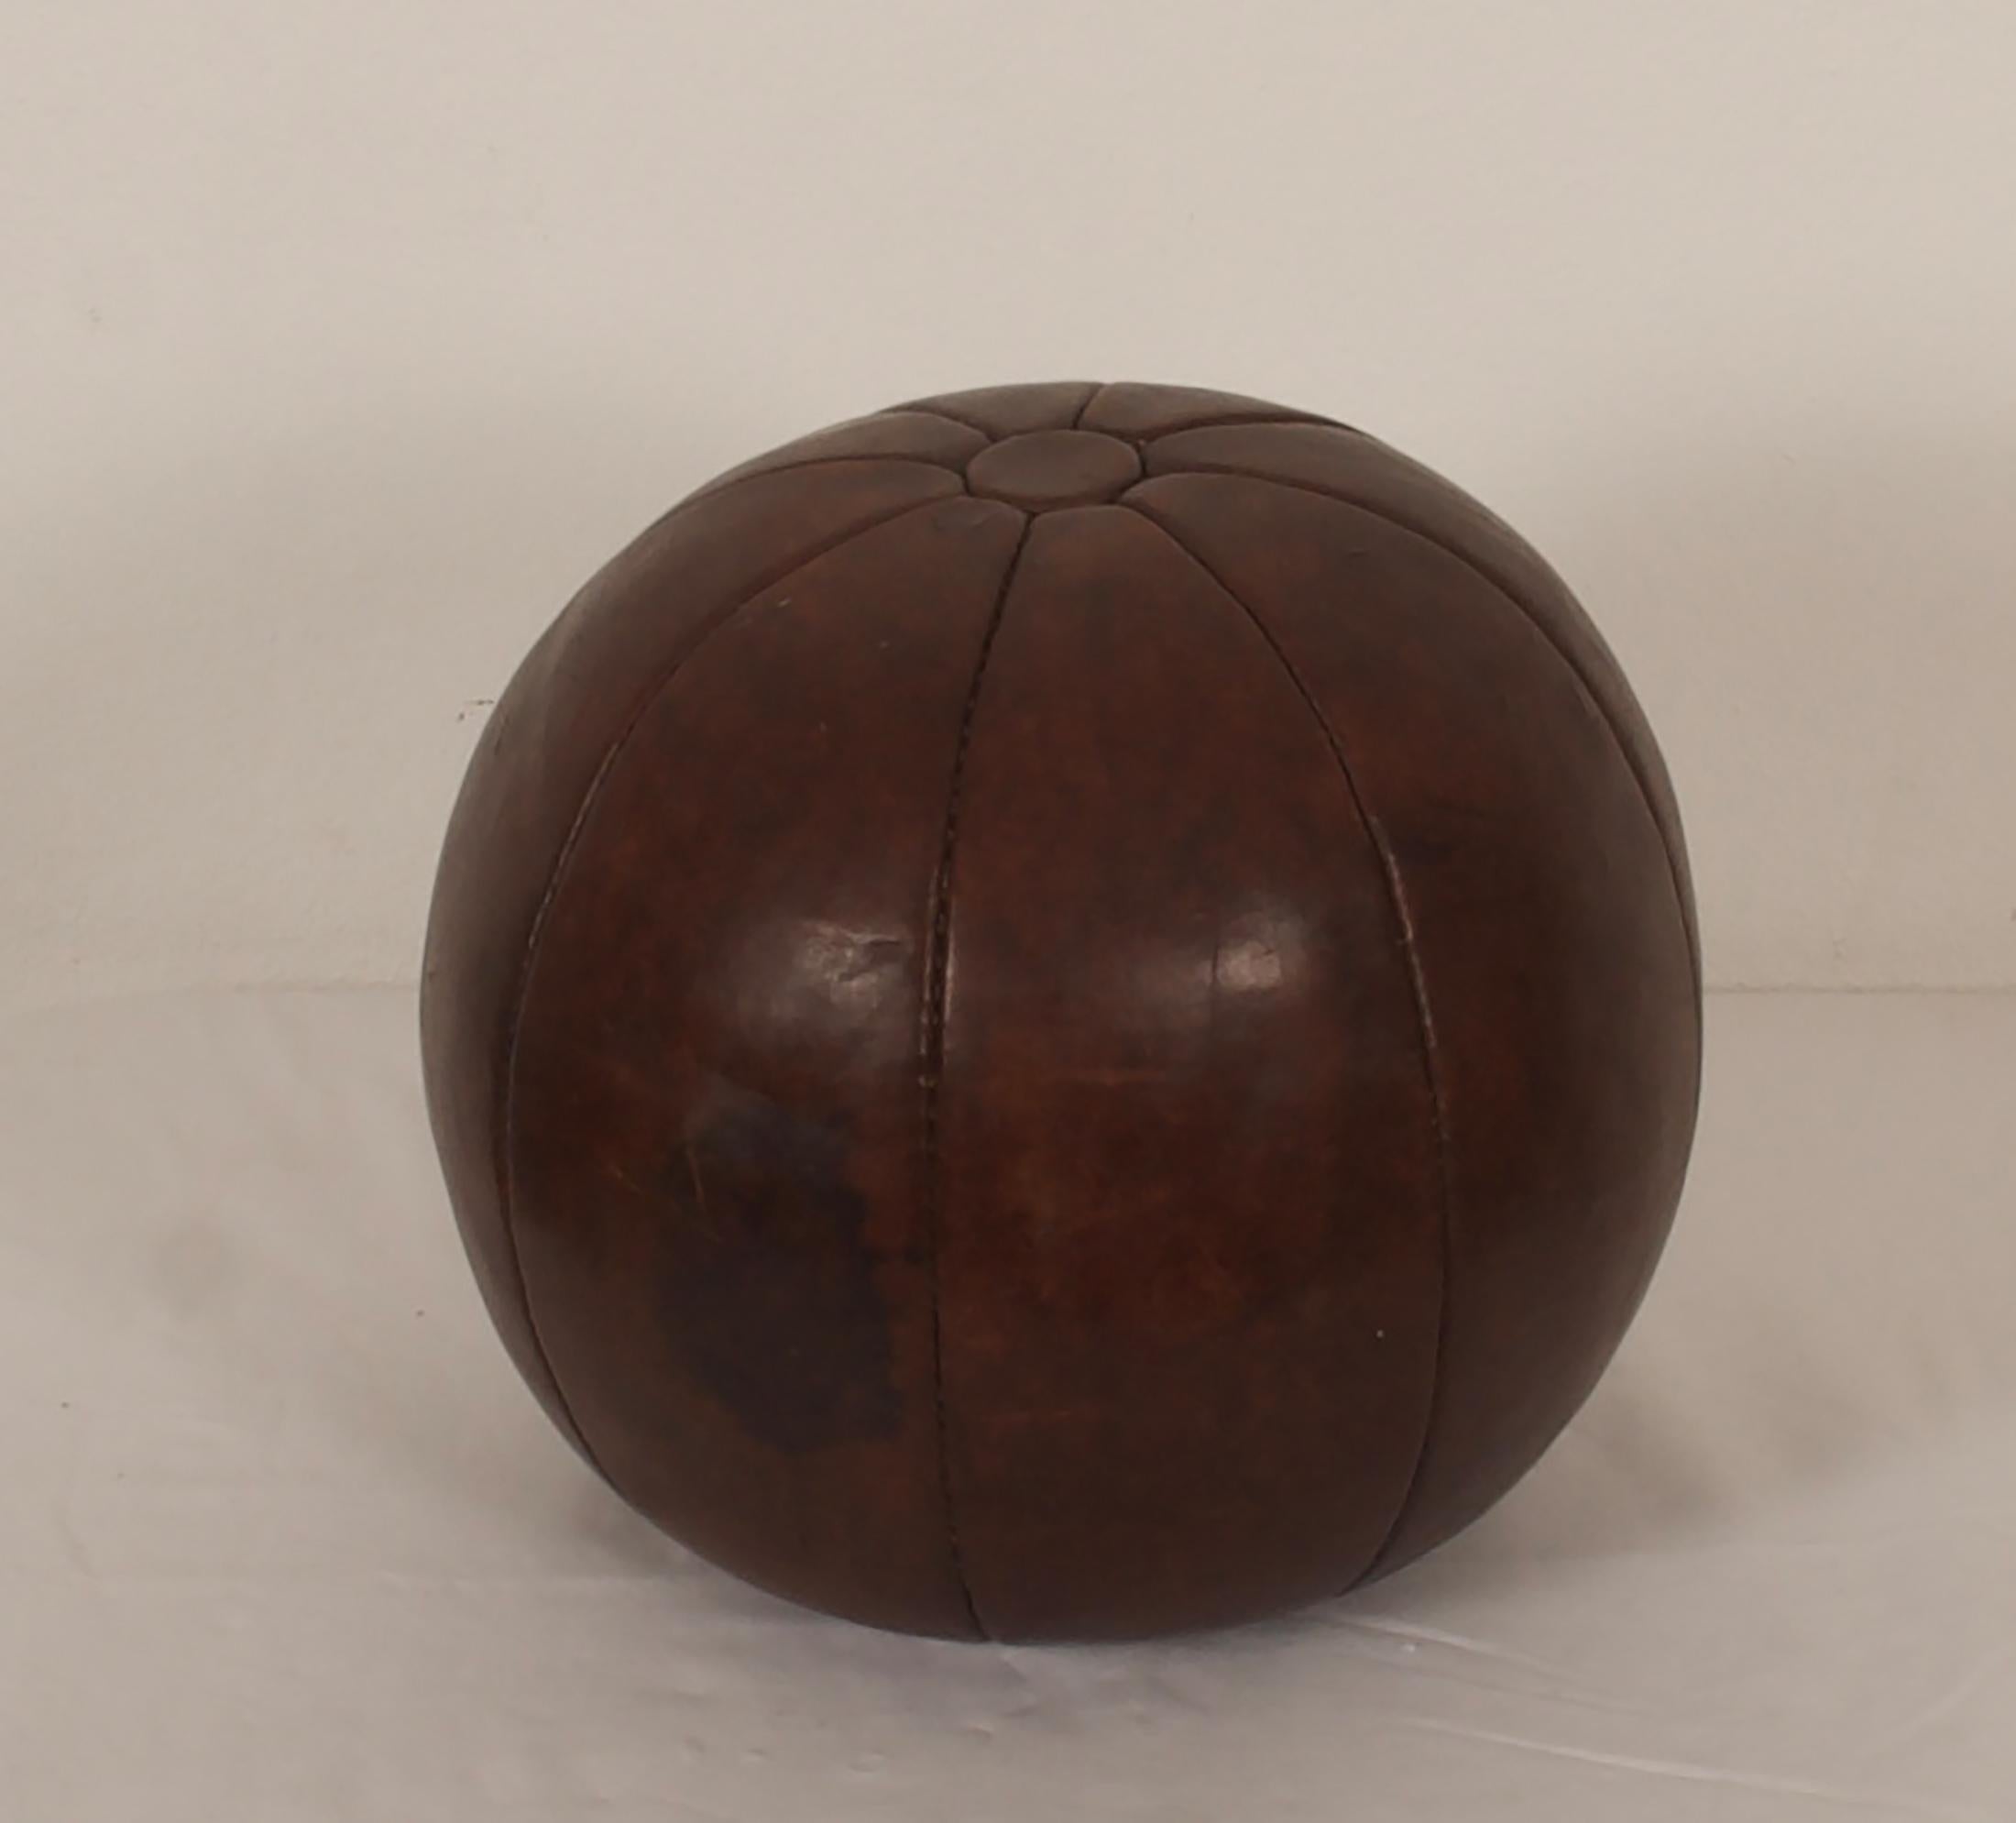 Original patinated leather medicine ball from the 1950s.